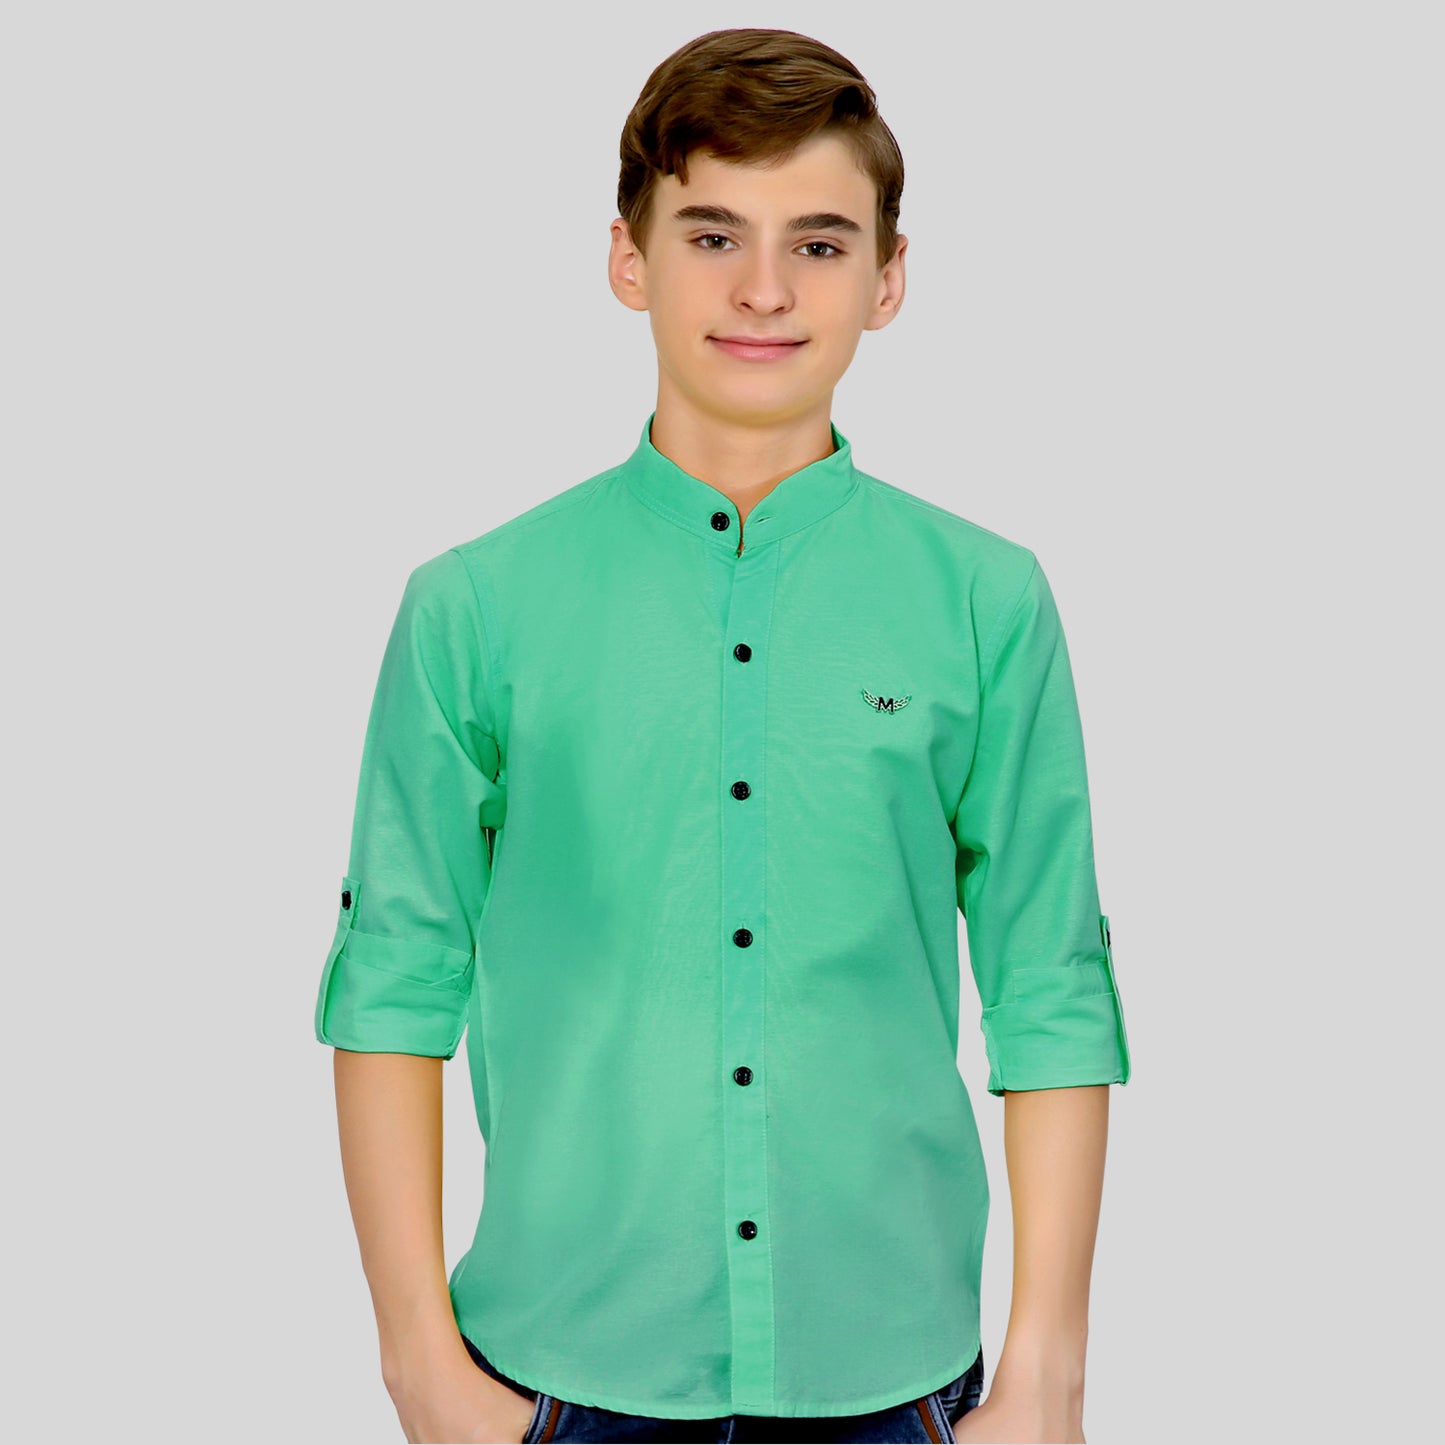 Collar Poppin' Style: Boys' Unique Shirt for Effortless Cool!